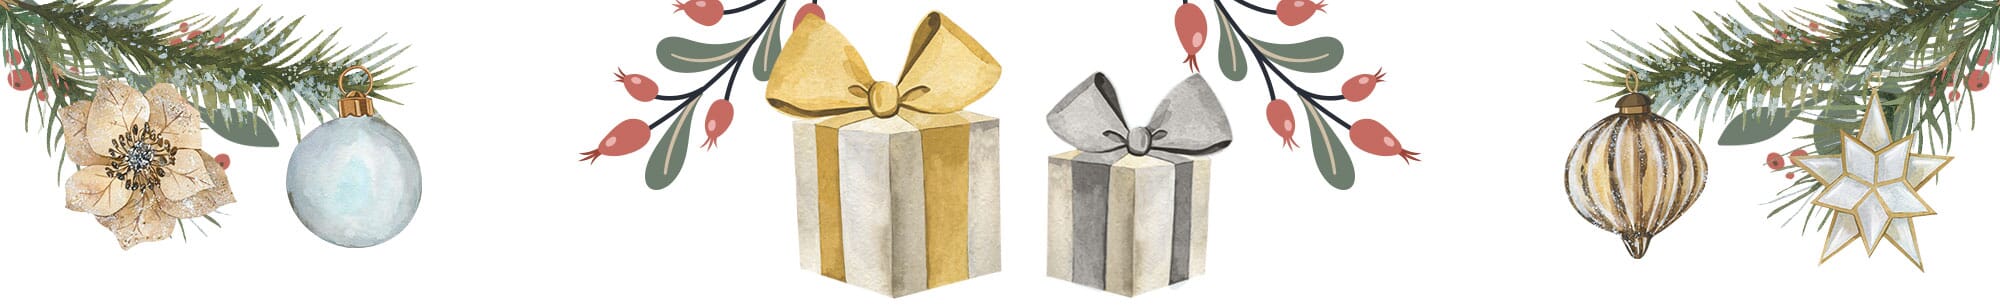 The best corporate gifts for holidays and christmas